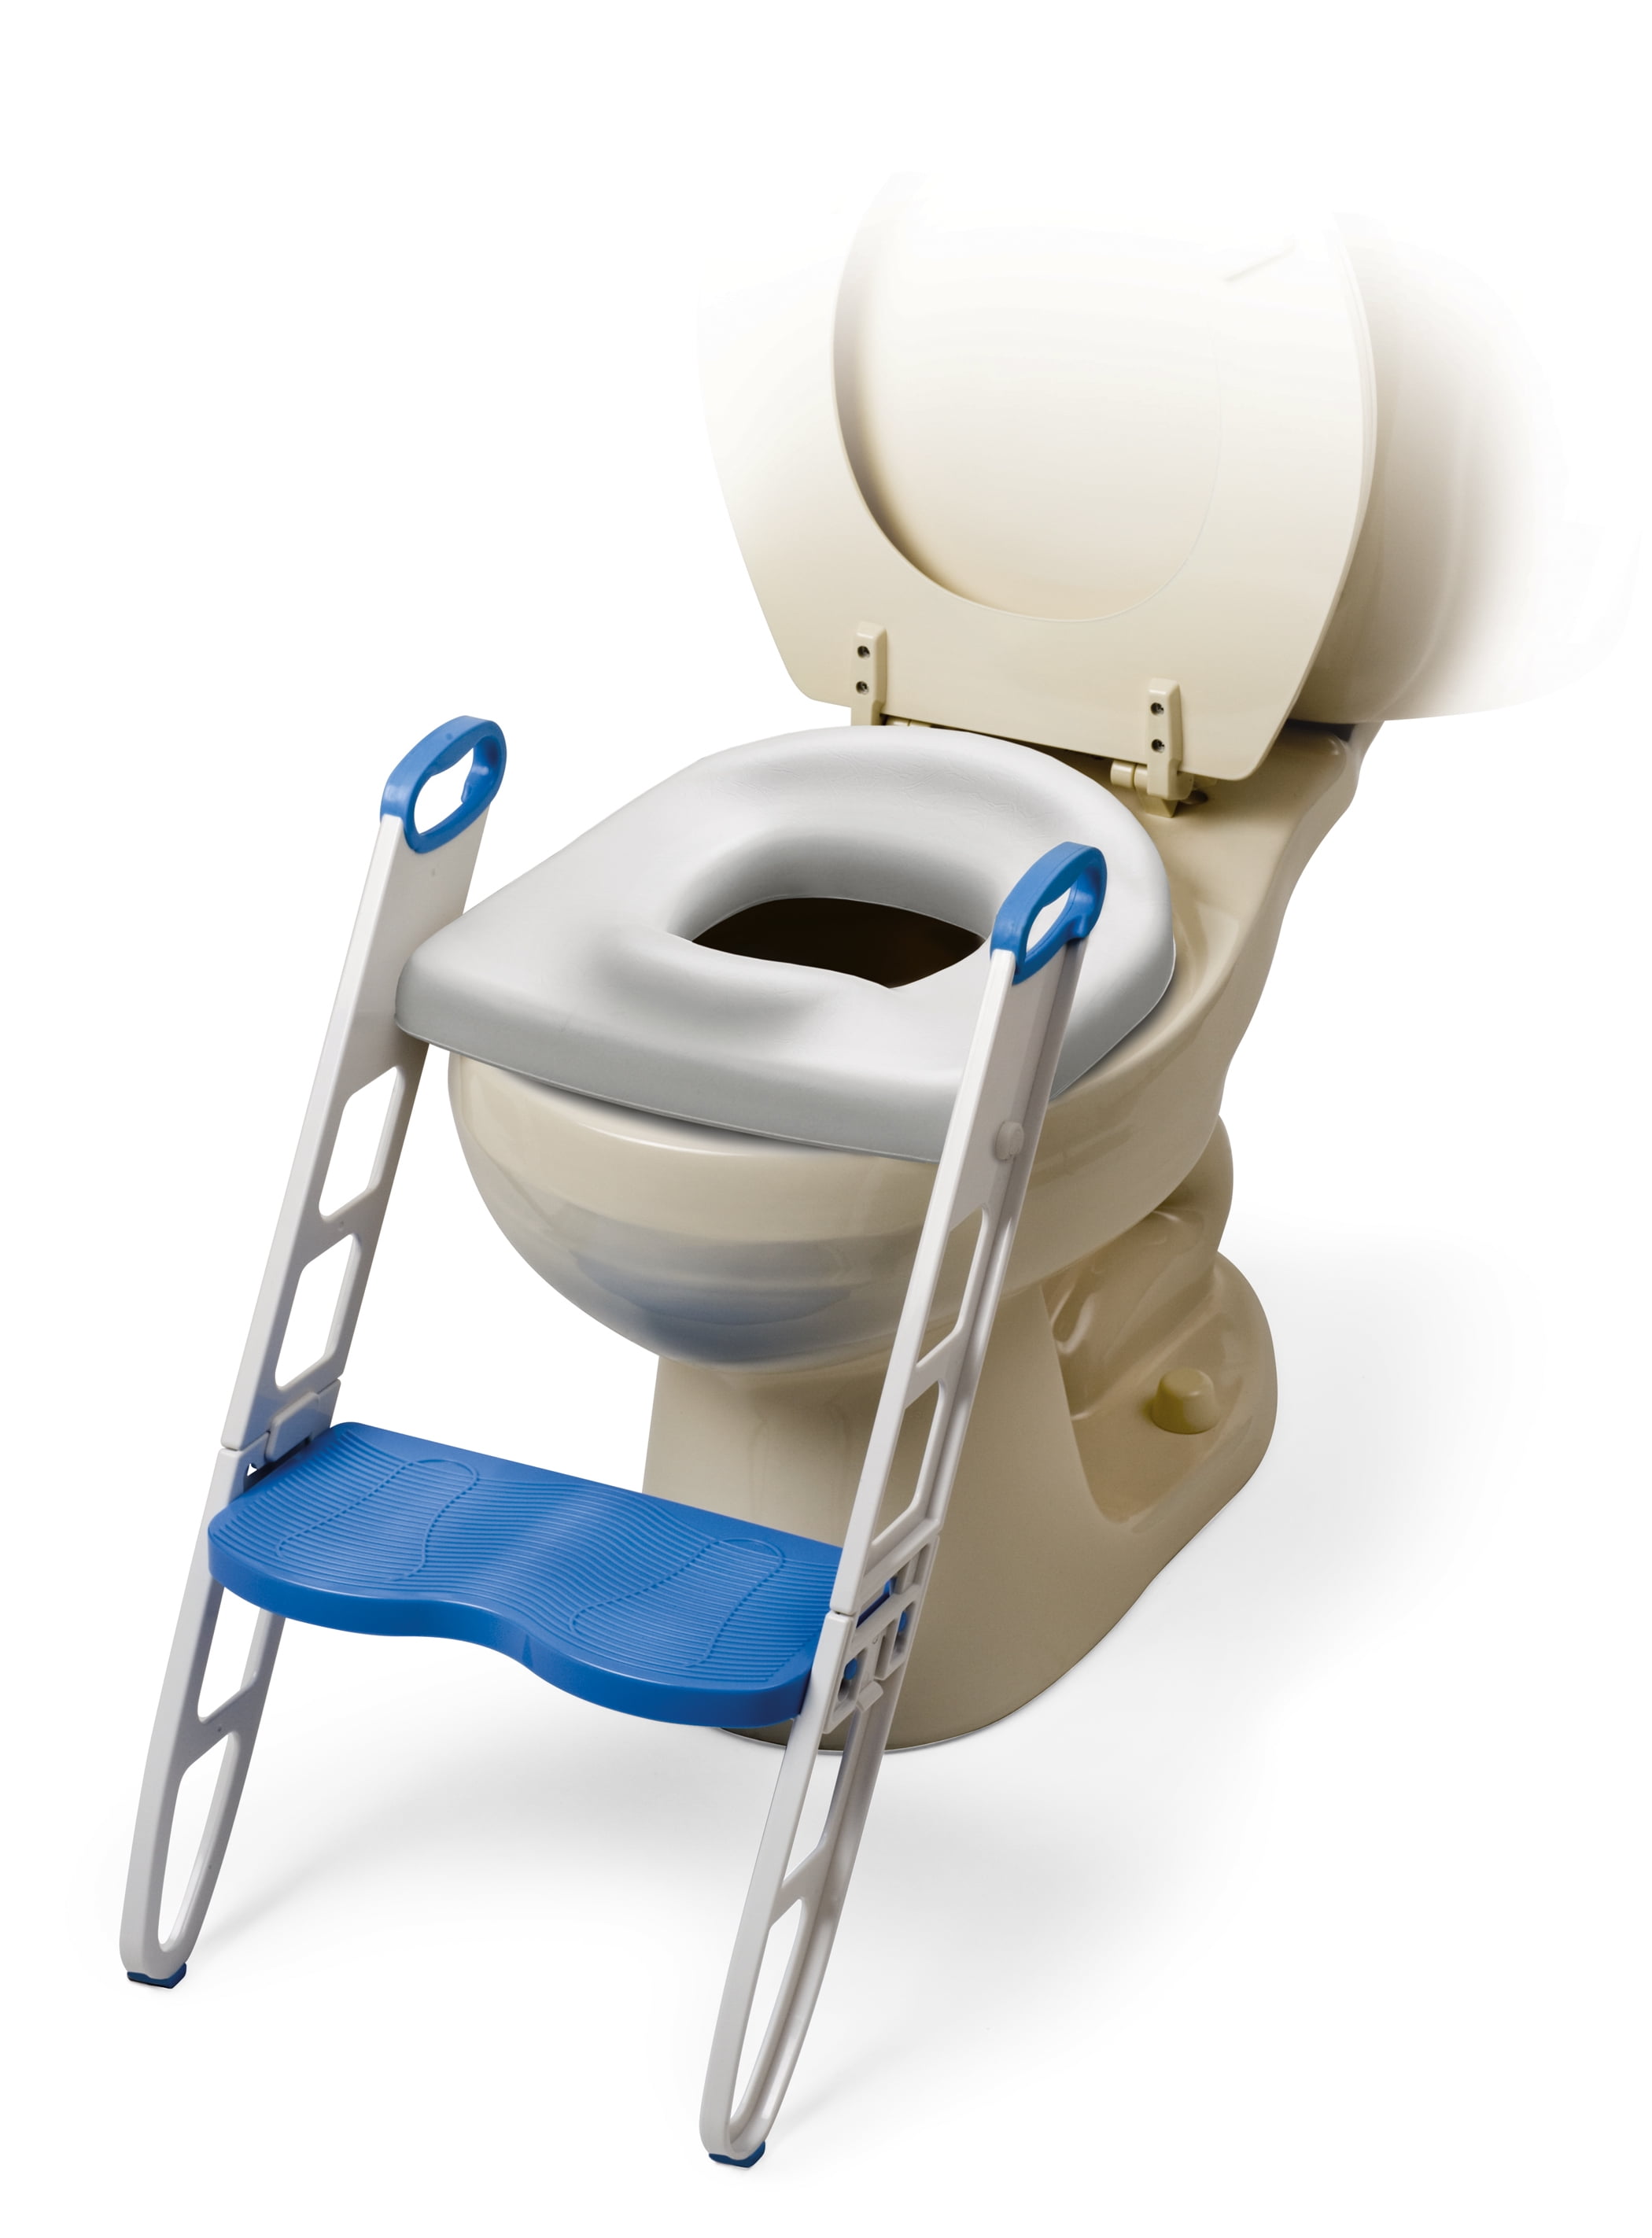 Trainer Toilet Potty Seat Chair Kids Toddler w/Ladder Step Up Training Stool NEW 